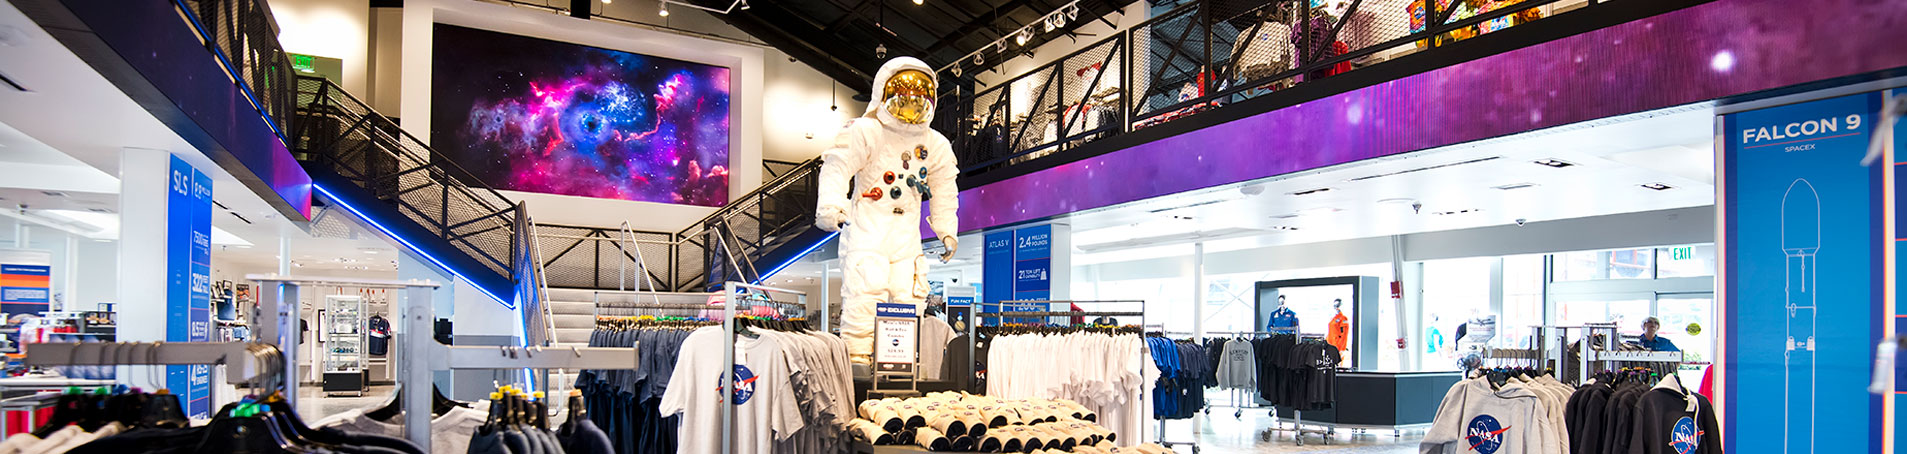 The Space Shop at Kennedy Space Center Visitor Complex features with a large selection of souvenirs, interactive features, and the real Apollo 11 gantry.